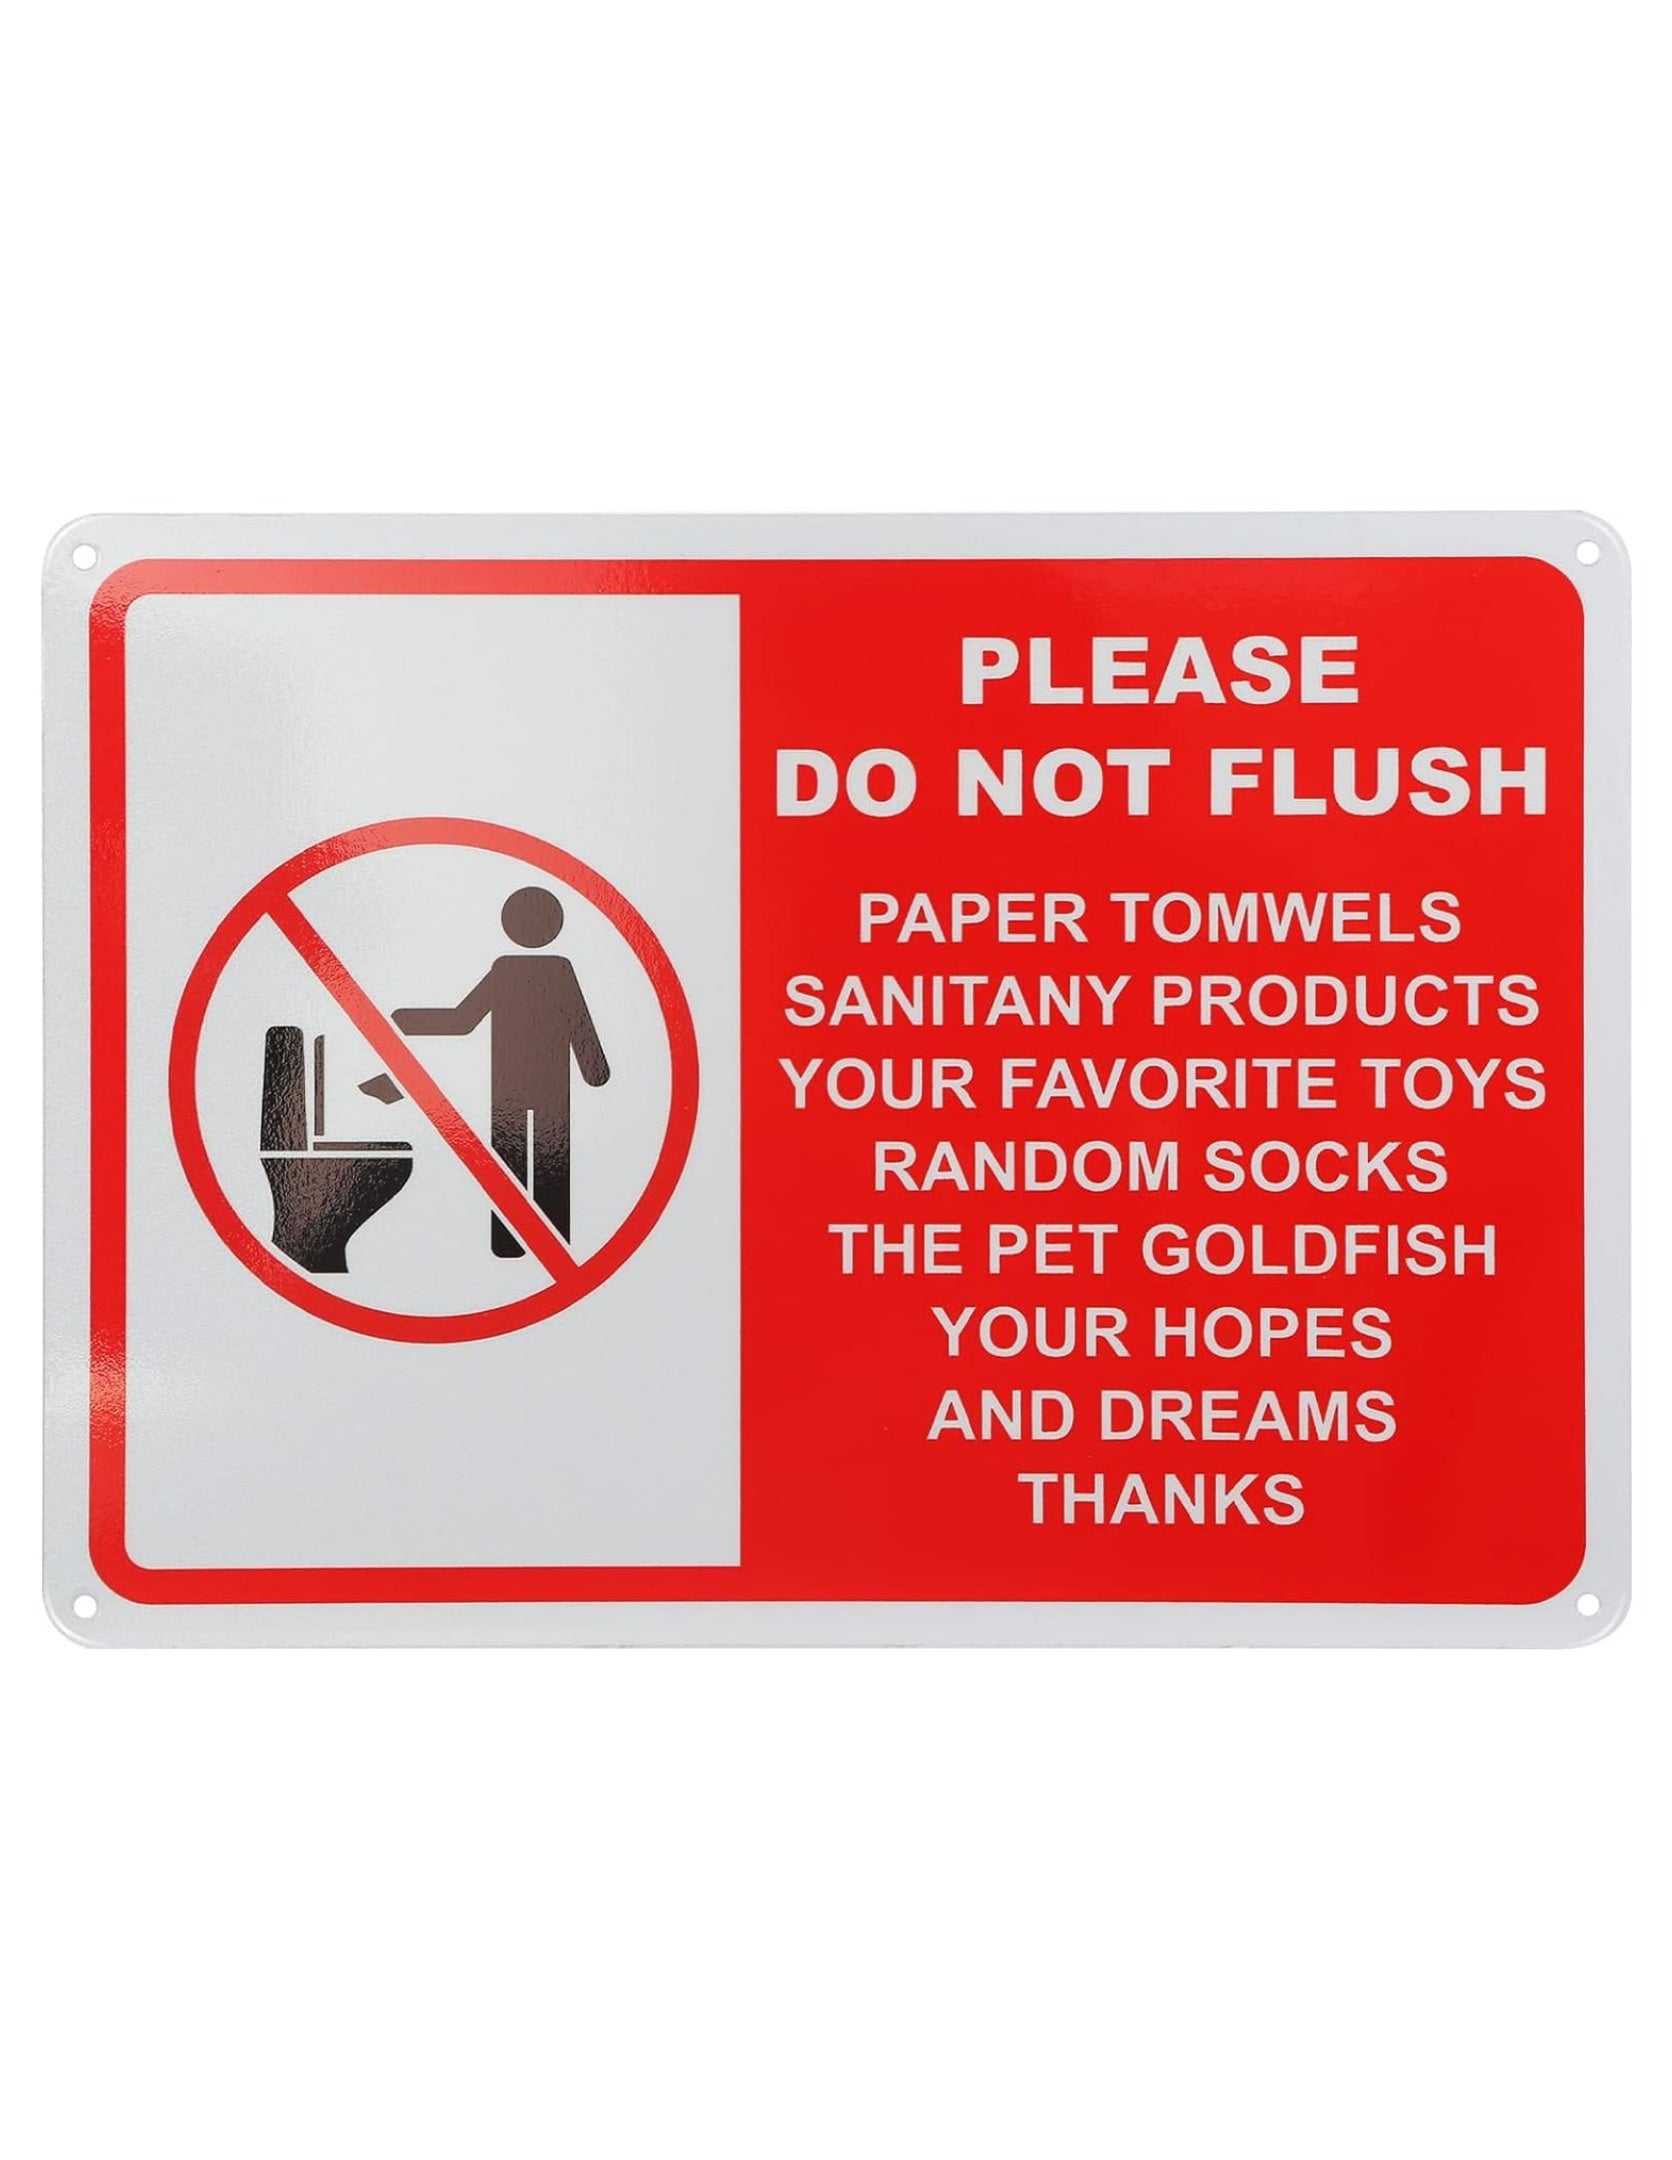 Thten 7"x10" Please Do Not Flush Paper Towels or Femine Products in Toilet Sign for Bathroom,Easy to Mounting for Home,Business,Airbnb,Workplaces,Cafes and Office Red